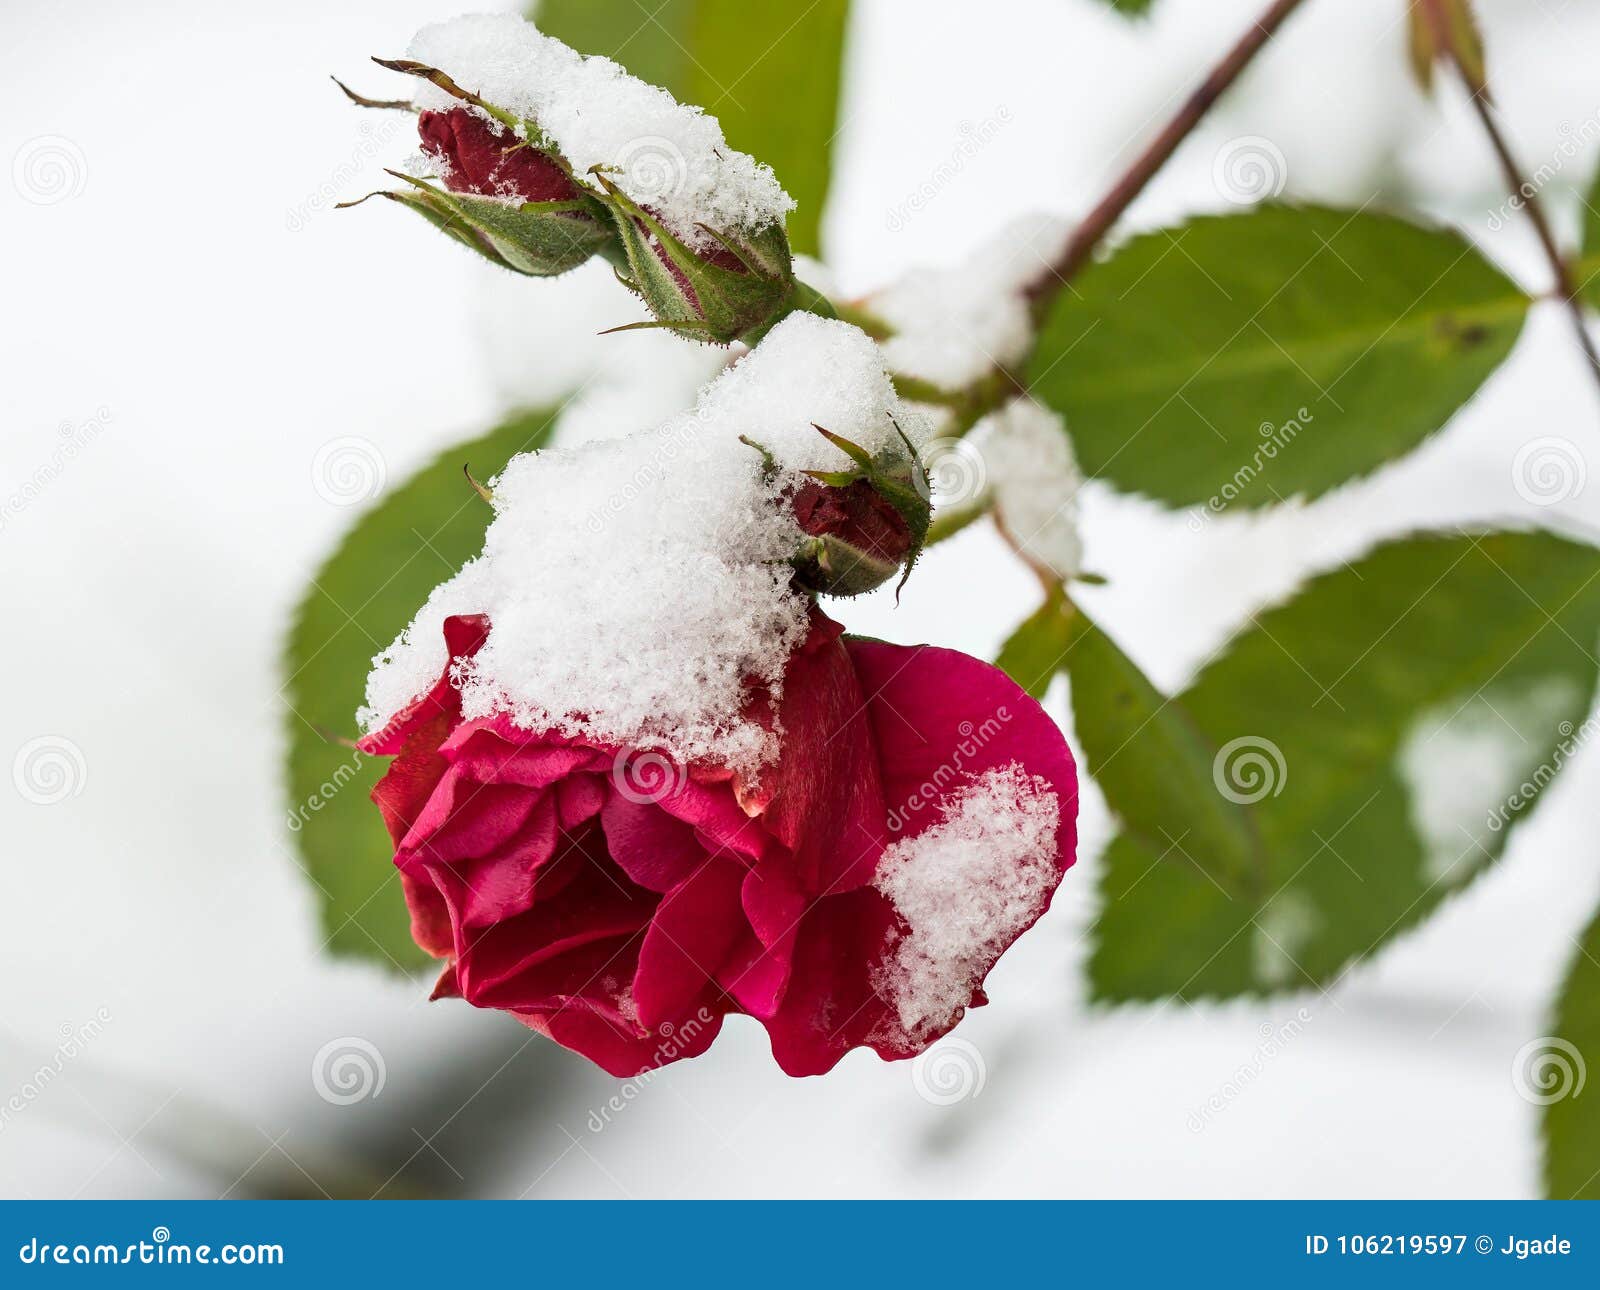 Red rose with snow stock image. Image of leaf, flower - 106219597